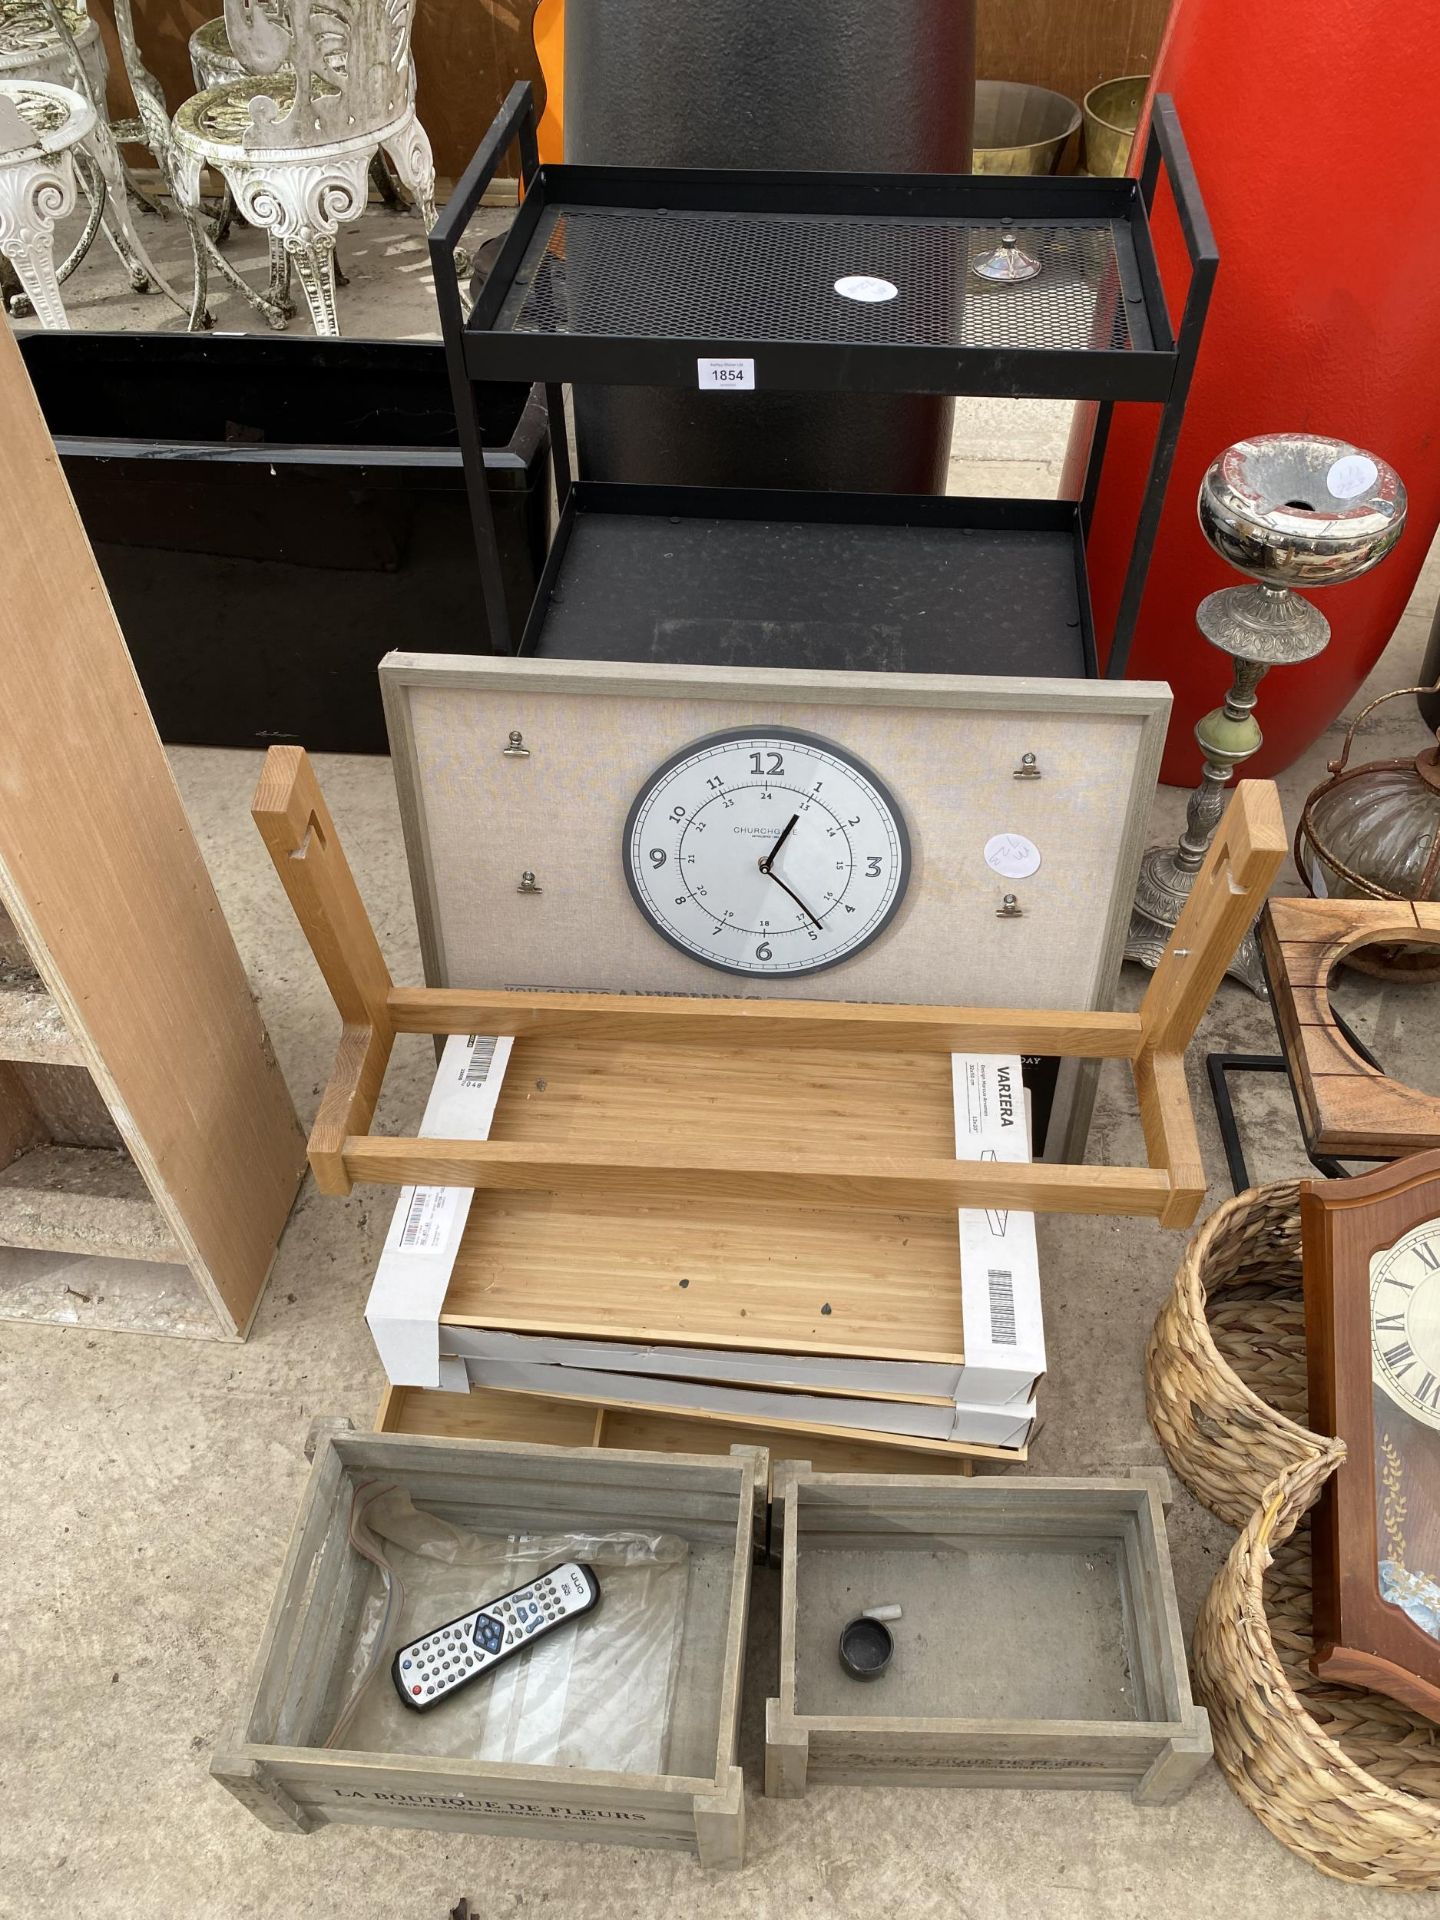 AN ASSORTMENT OF ITEMS TO INCLUDE TRAYS, A SHELVING UNIT AND A CLOCK ETC